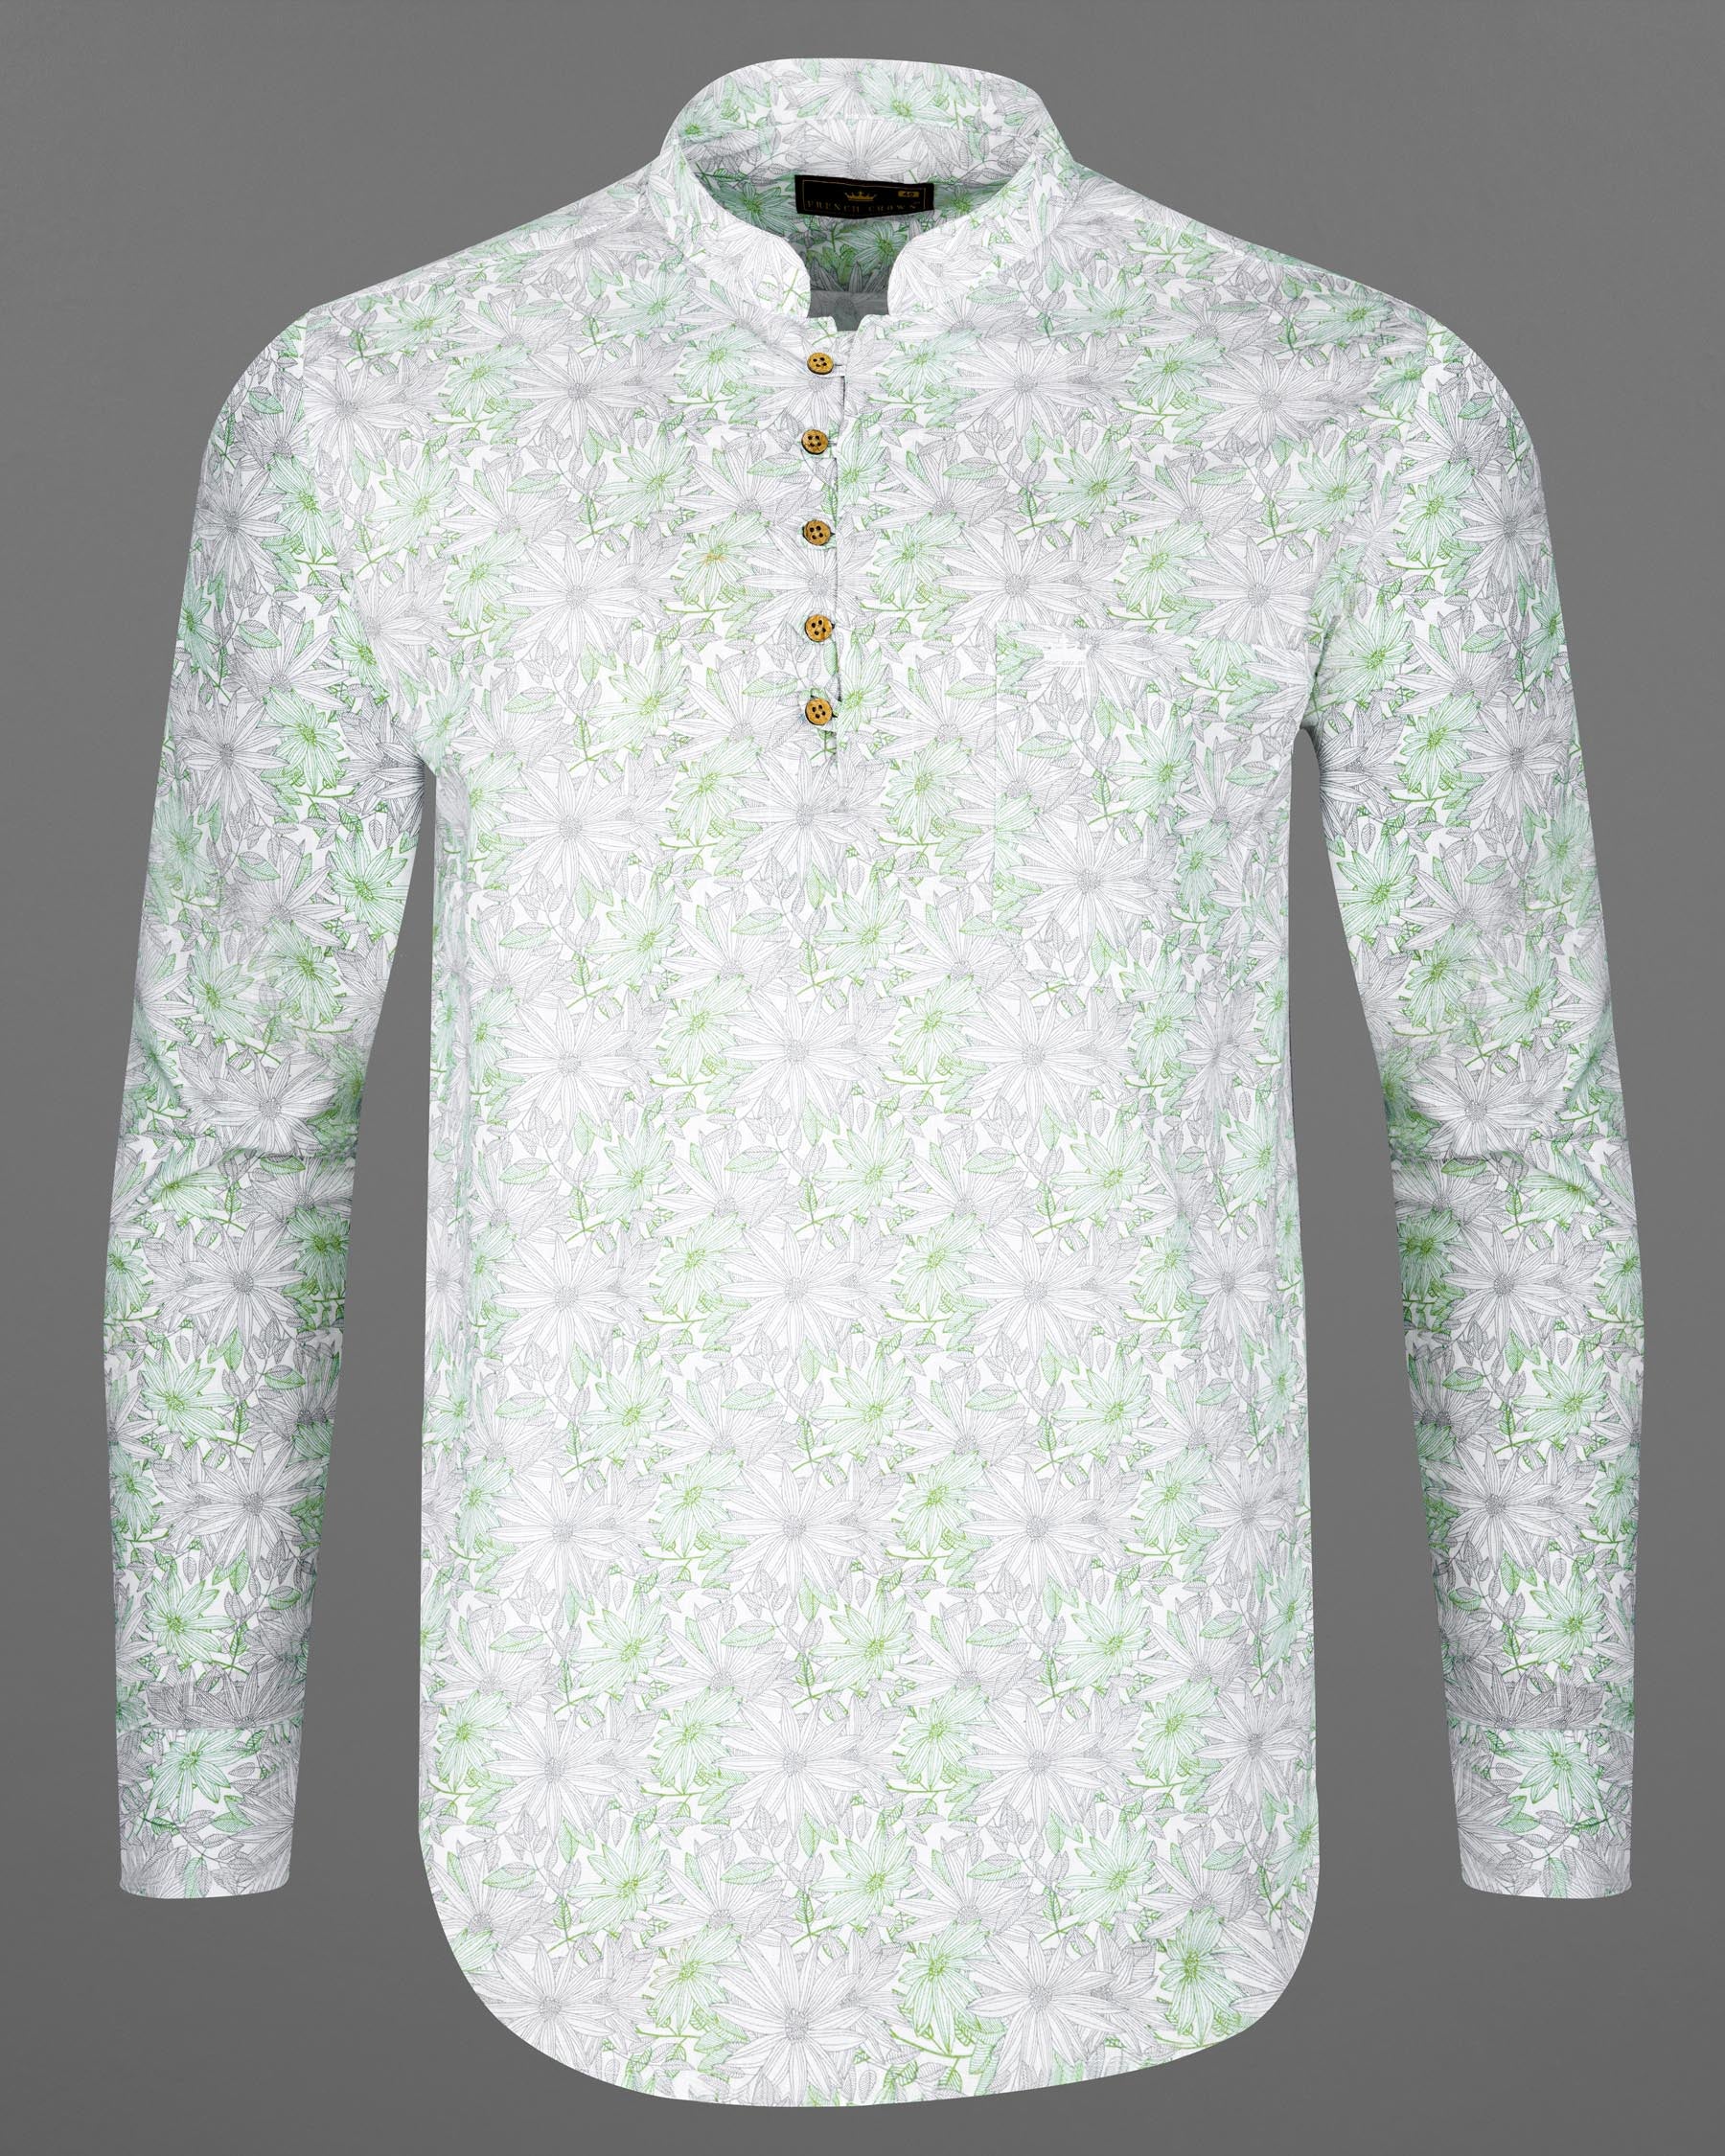 Olivine Green With White Floral Printed Luxurious Linen Kurta Shirt 7933-KS-38,7933-KS-H-38,7933-KS-39,7933-KS-H-39,7933-KS-40,7933-KS-H-40,7933-KS-42,7933-KS-H-42,7933-KS-44,7933-KS-H-44,7933-KS-46,7933-KS-H-46,7933-KS-48,7933-KS-H-48,7933-KS-50,7933-KS-H-50,7933-KS-52,7933-KS-H-52